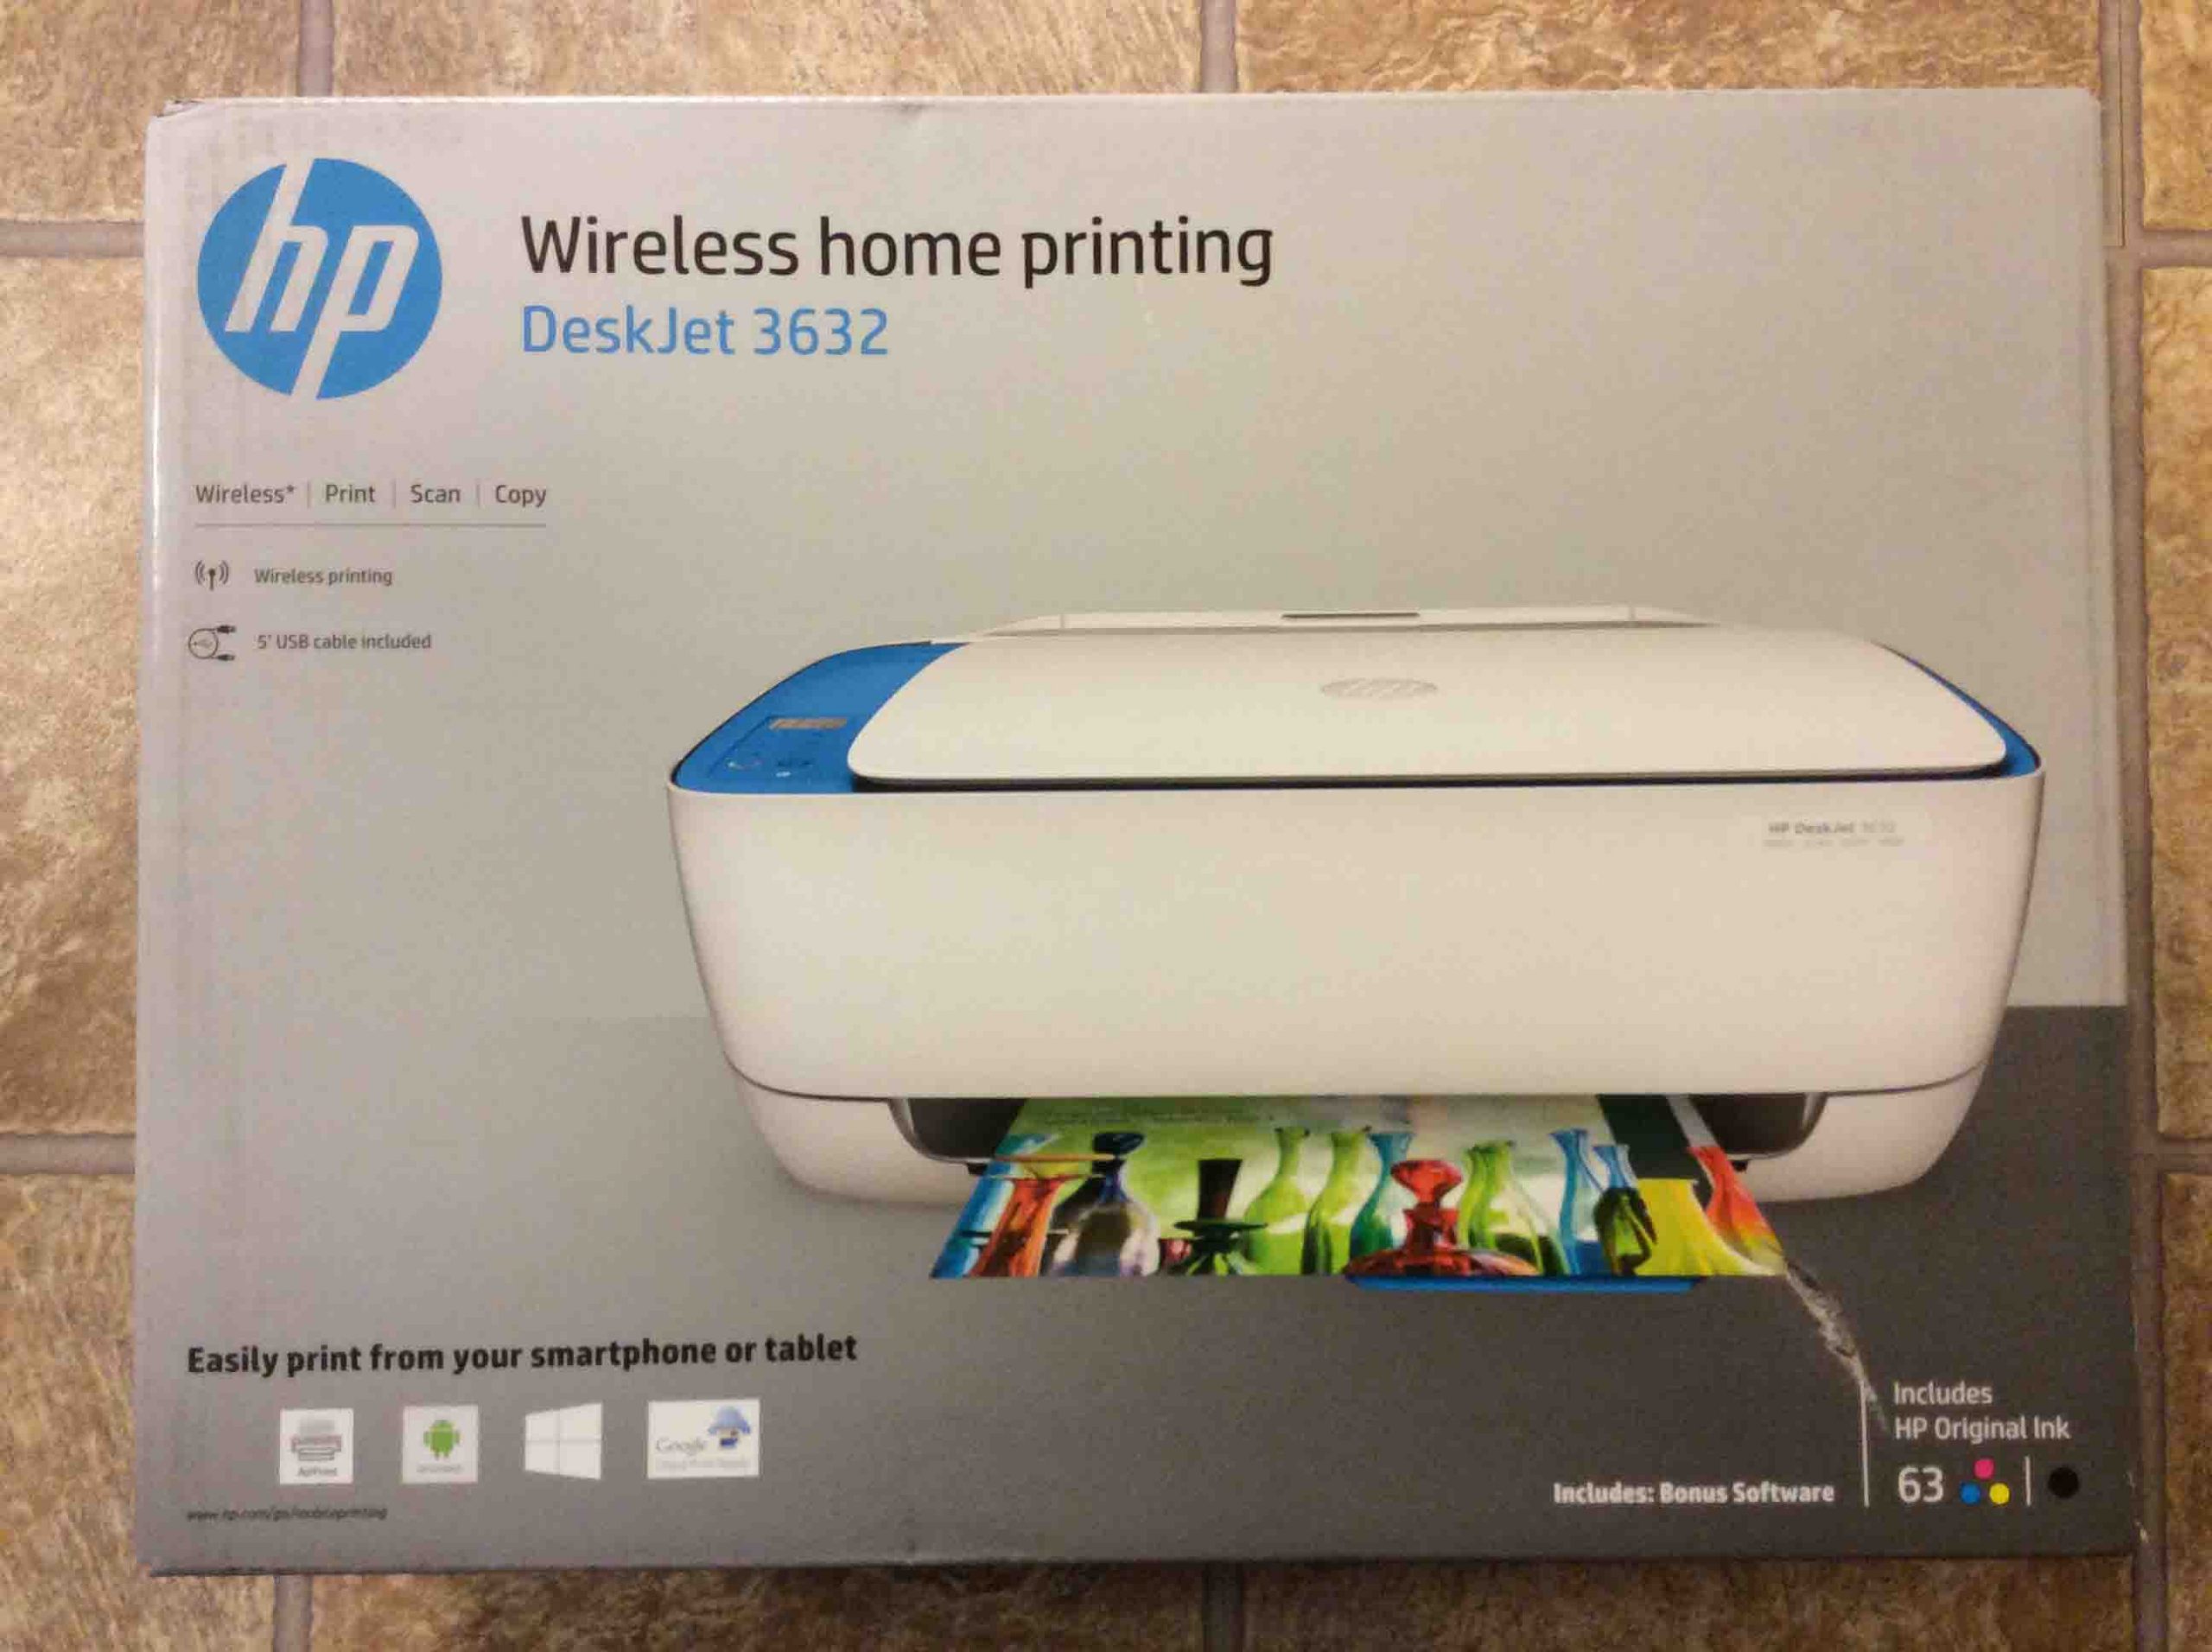 How to Connect HP DeskJet 3632 to WiFi Tom's Tek Stop